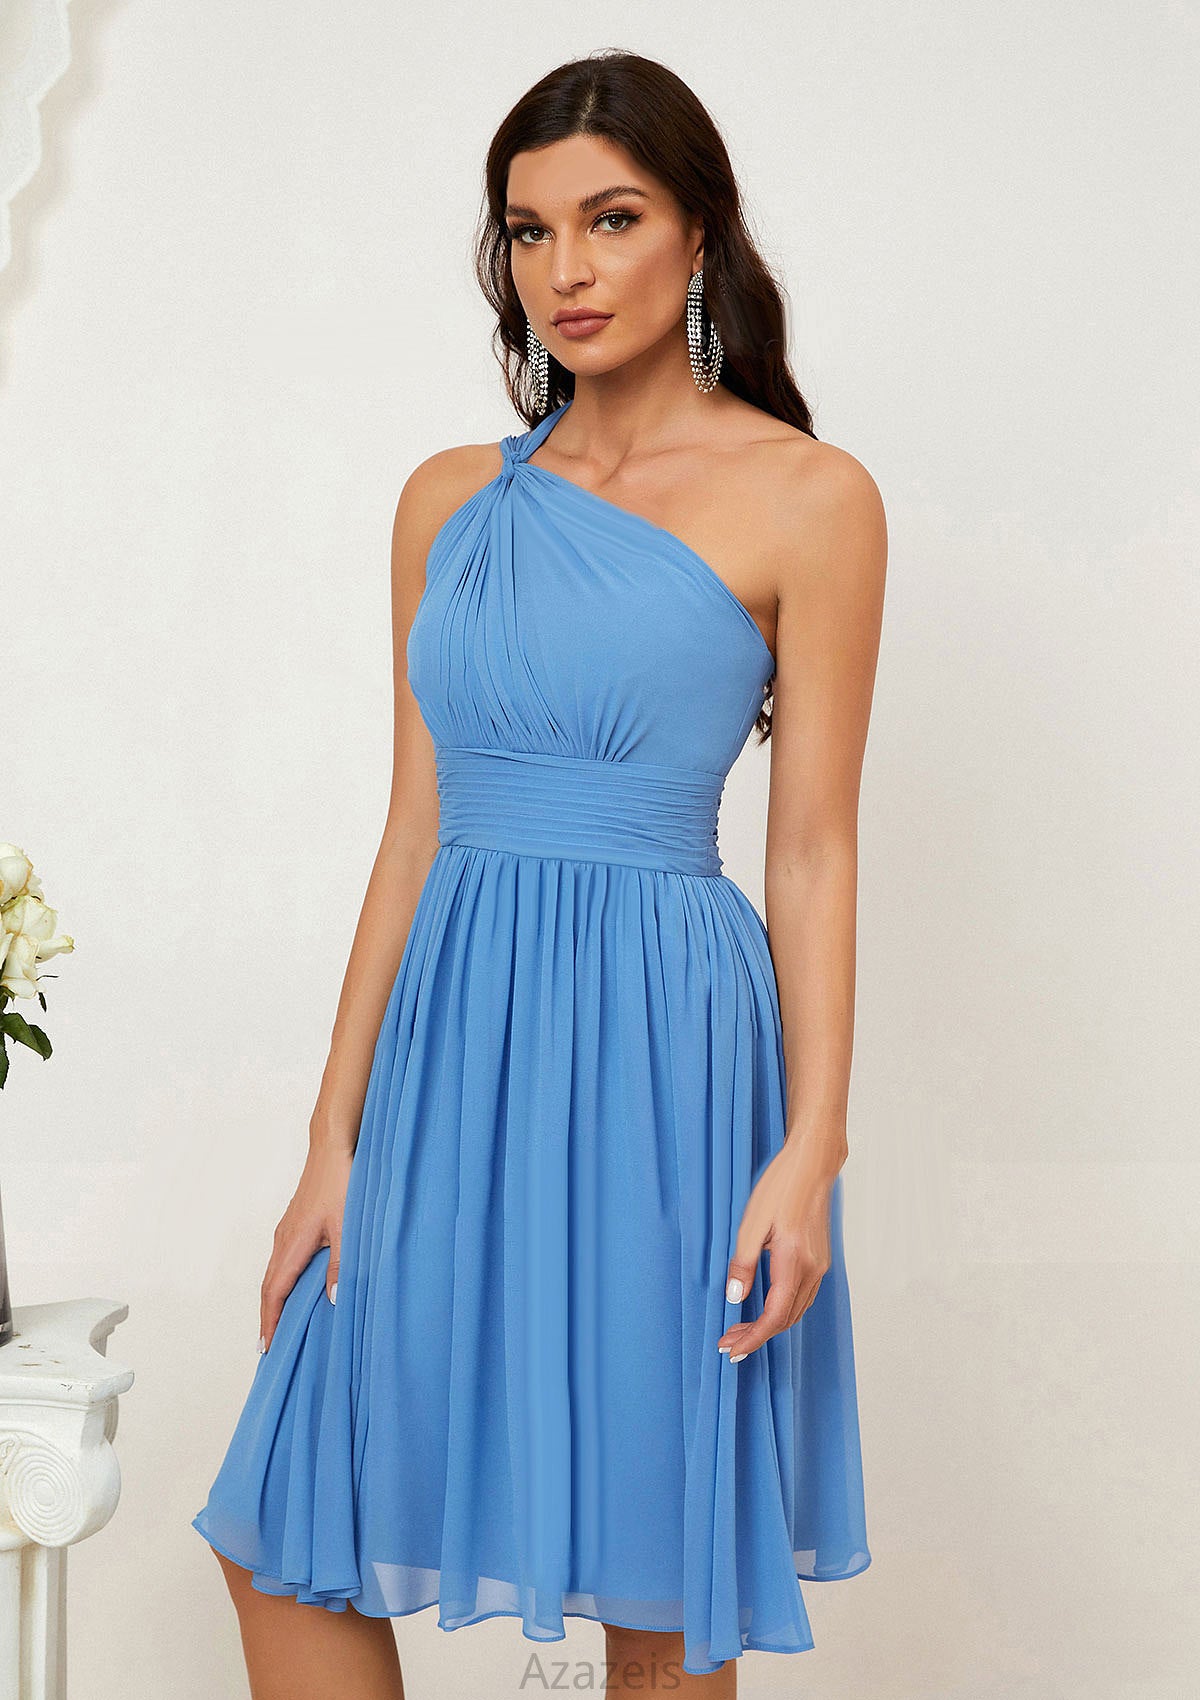 A-line One-Shoulder Sleeveless Chiffon Knee-Length Bridesmaid Dresses With Pleated Luciana DFP0025612